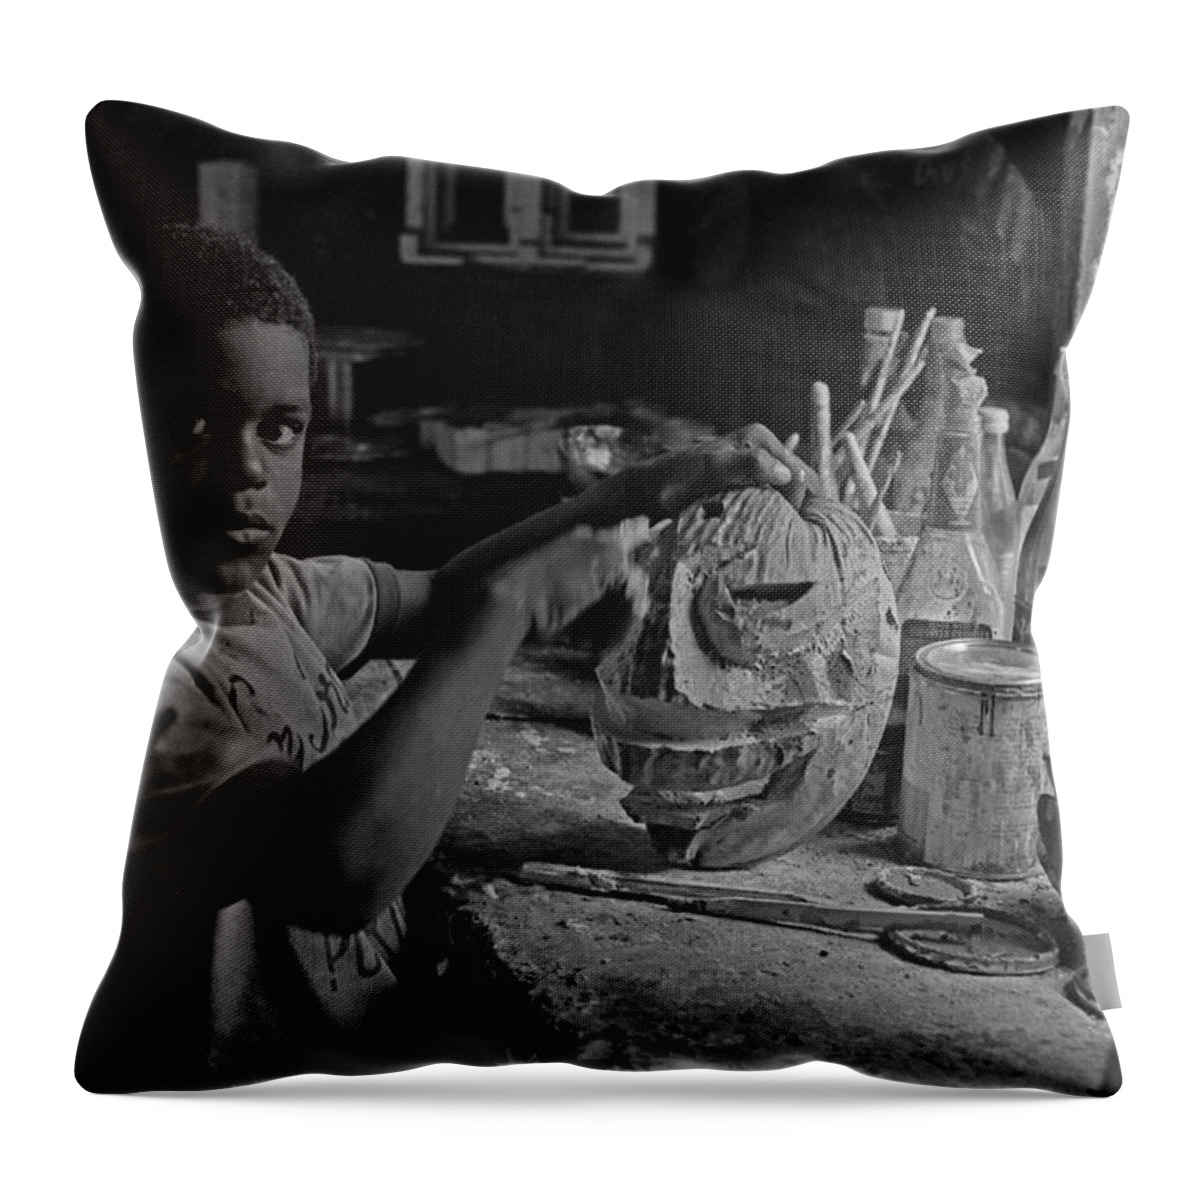 Black And White Throw Pillow featuring the photograph Mask Maker by Guillermo Rodriguez